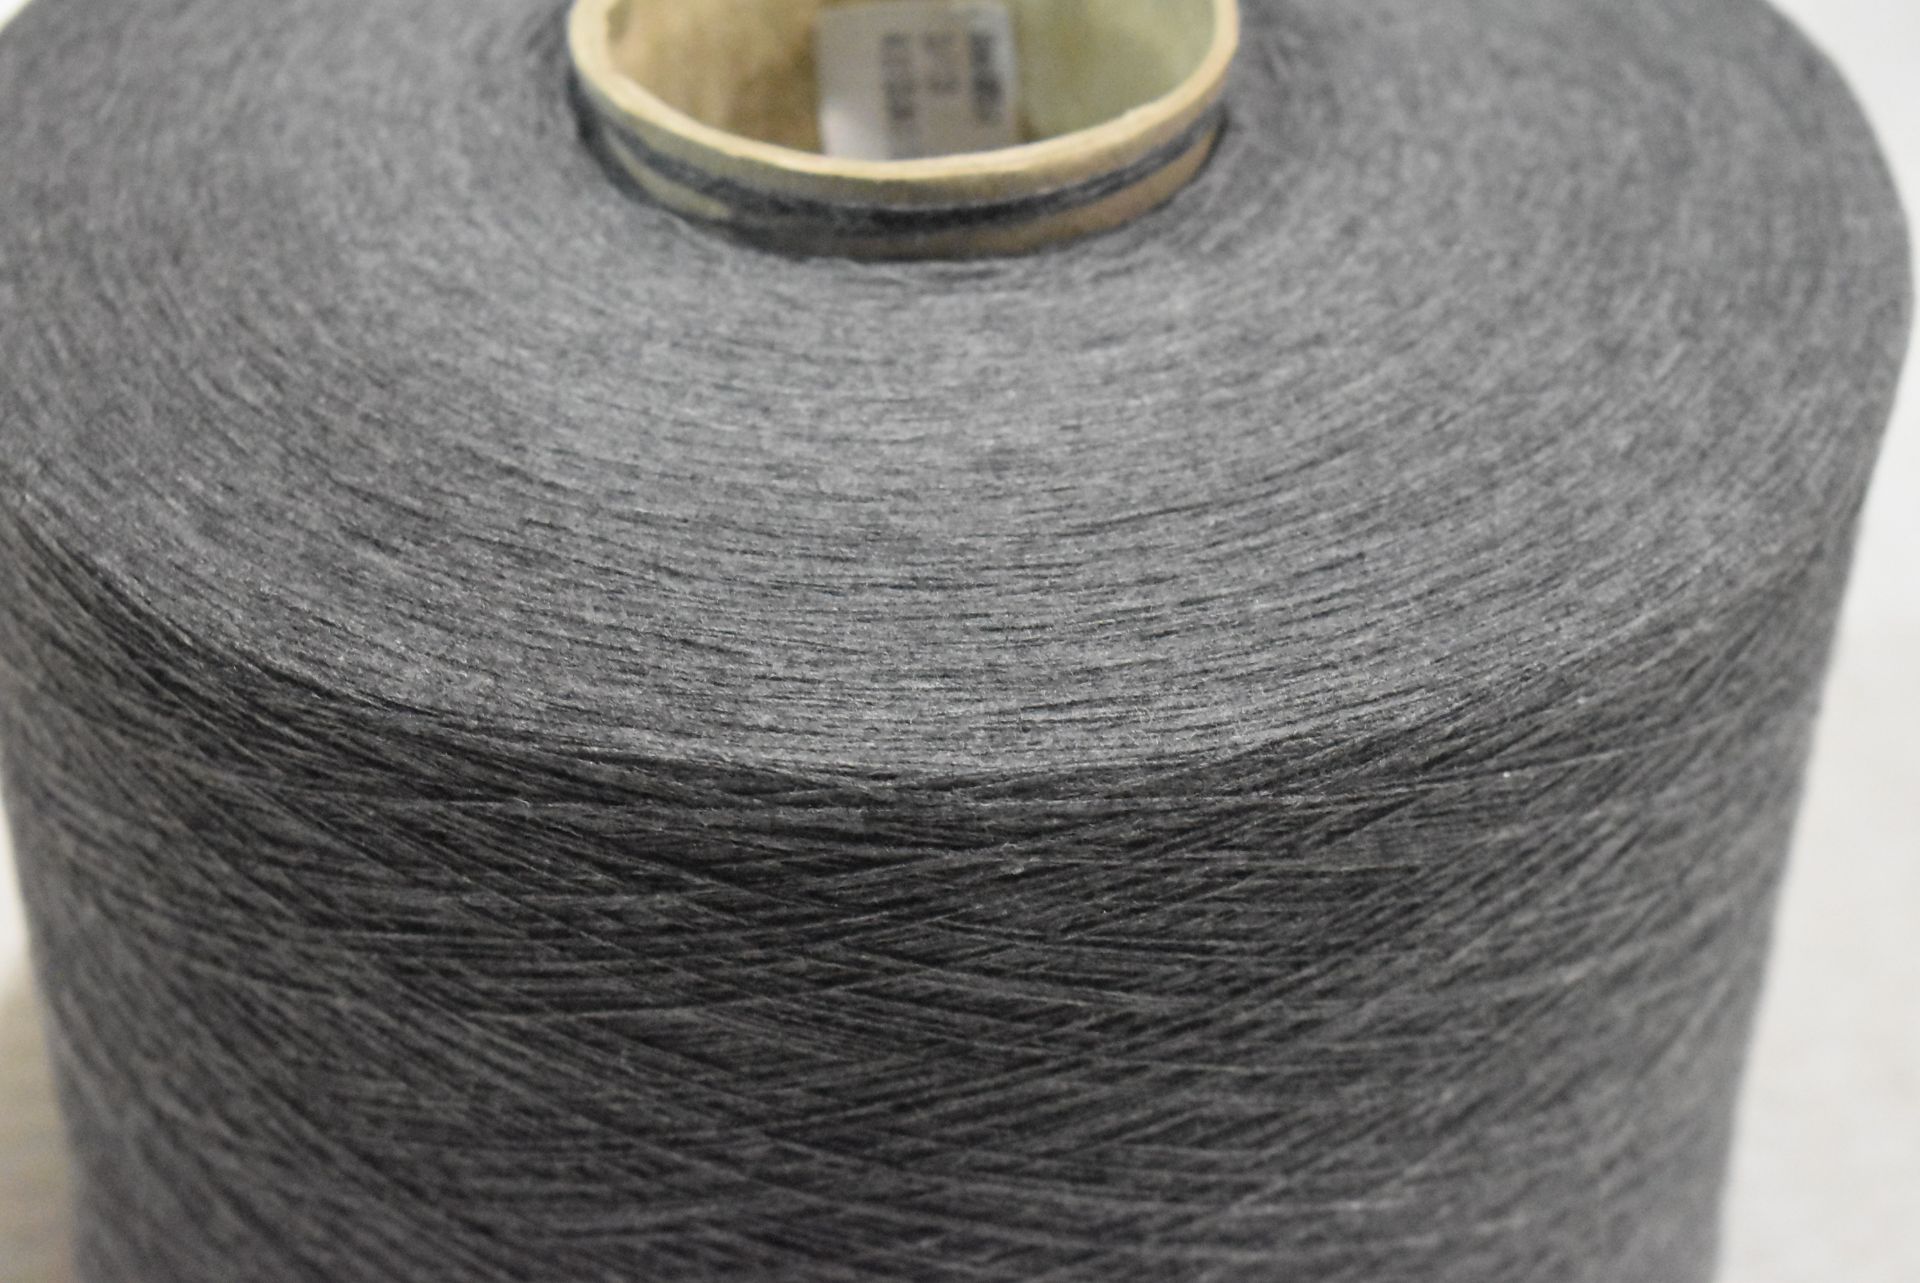 1 x Cone of 1/13 MicroCotton Knitting Yarn - Mid Grey - Approx Weight: 2,500g - New Stock ABL Yarn - Image 7 of 18